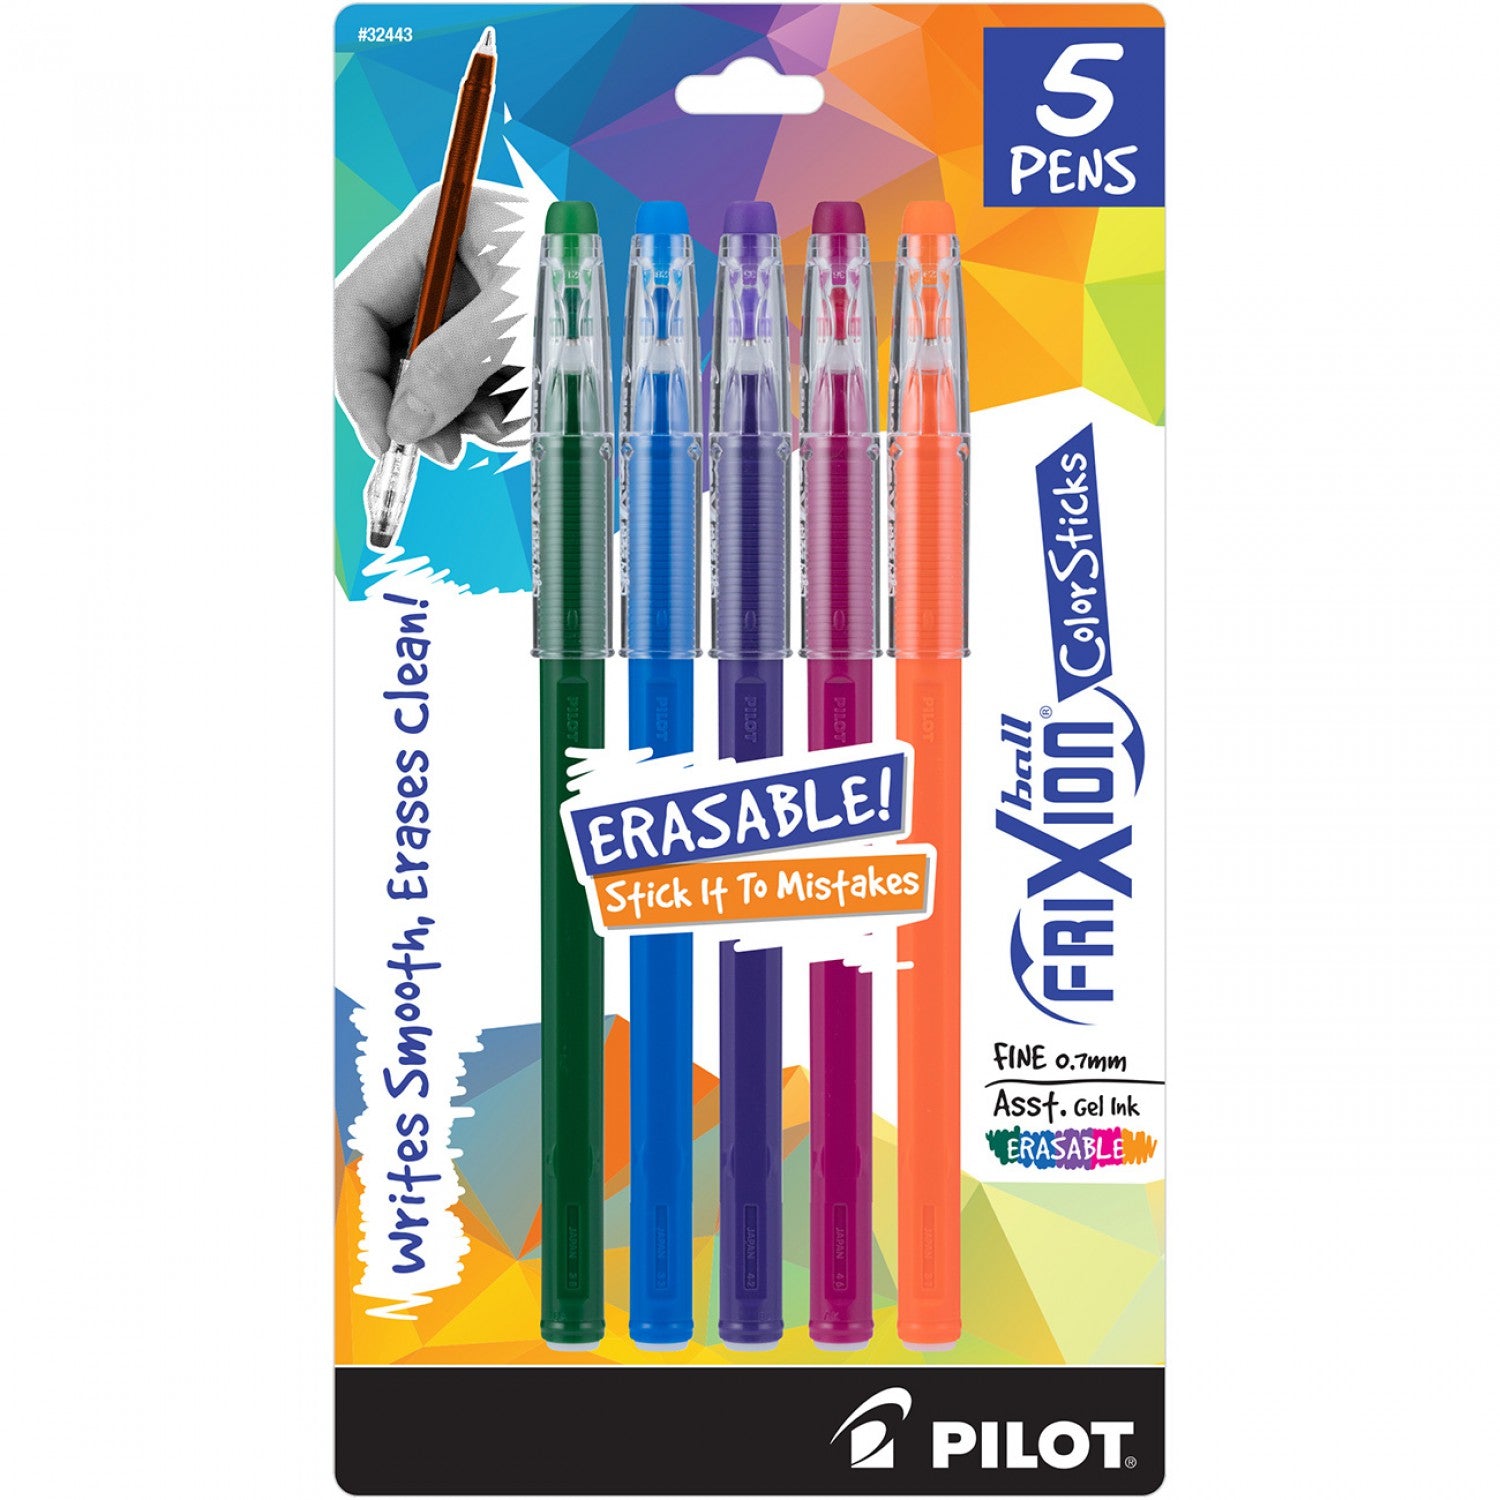 Write in smooth, vibrant color and Stick it to Mistakes! Write, erase and rewrite repeatedly without damaging documents. No wear or tear! Unique, thermo-sensitive gel ink formula disappears with erasing friction. Delivers vivid, smooth writing in 5 vibrant shades Streamlined, clipless, roll-free design.  Colors include hunter green, blue, purple, magenta and orange.